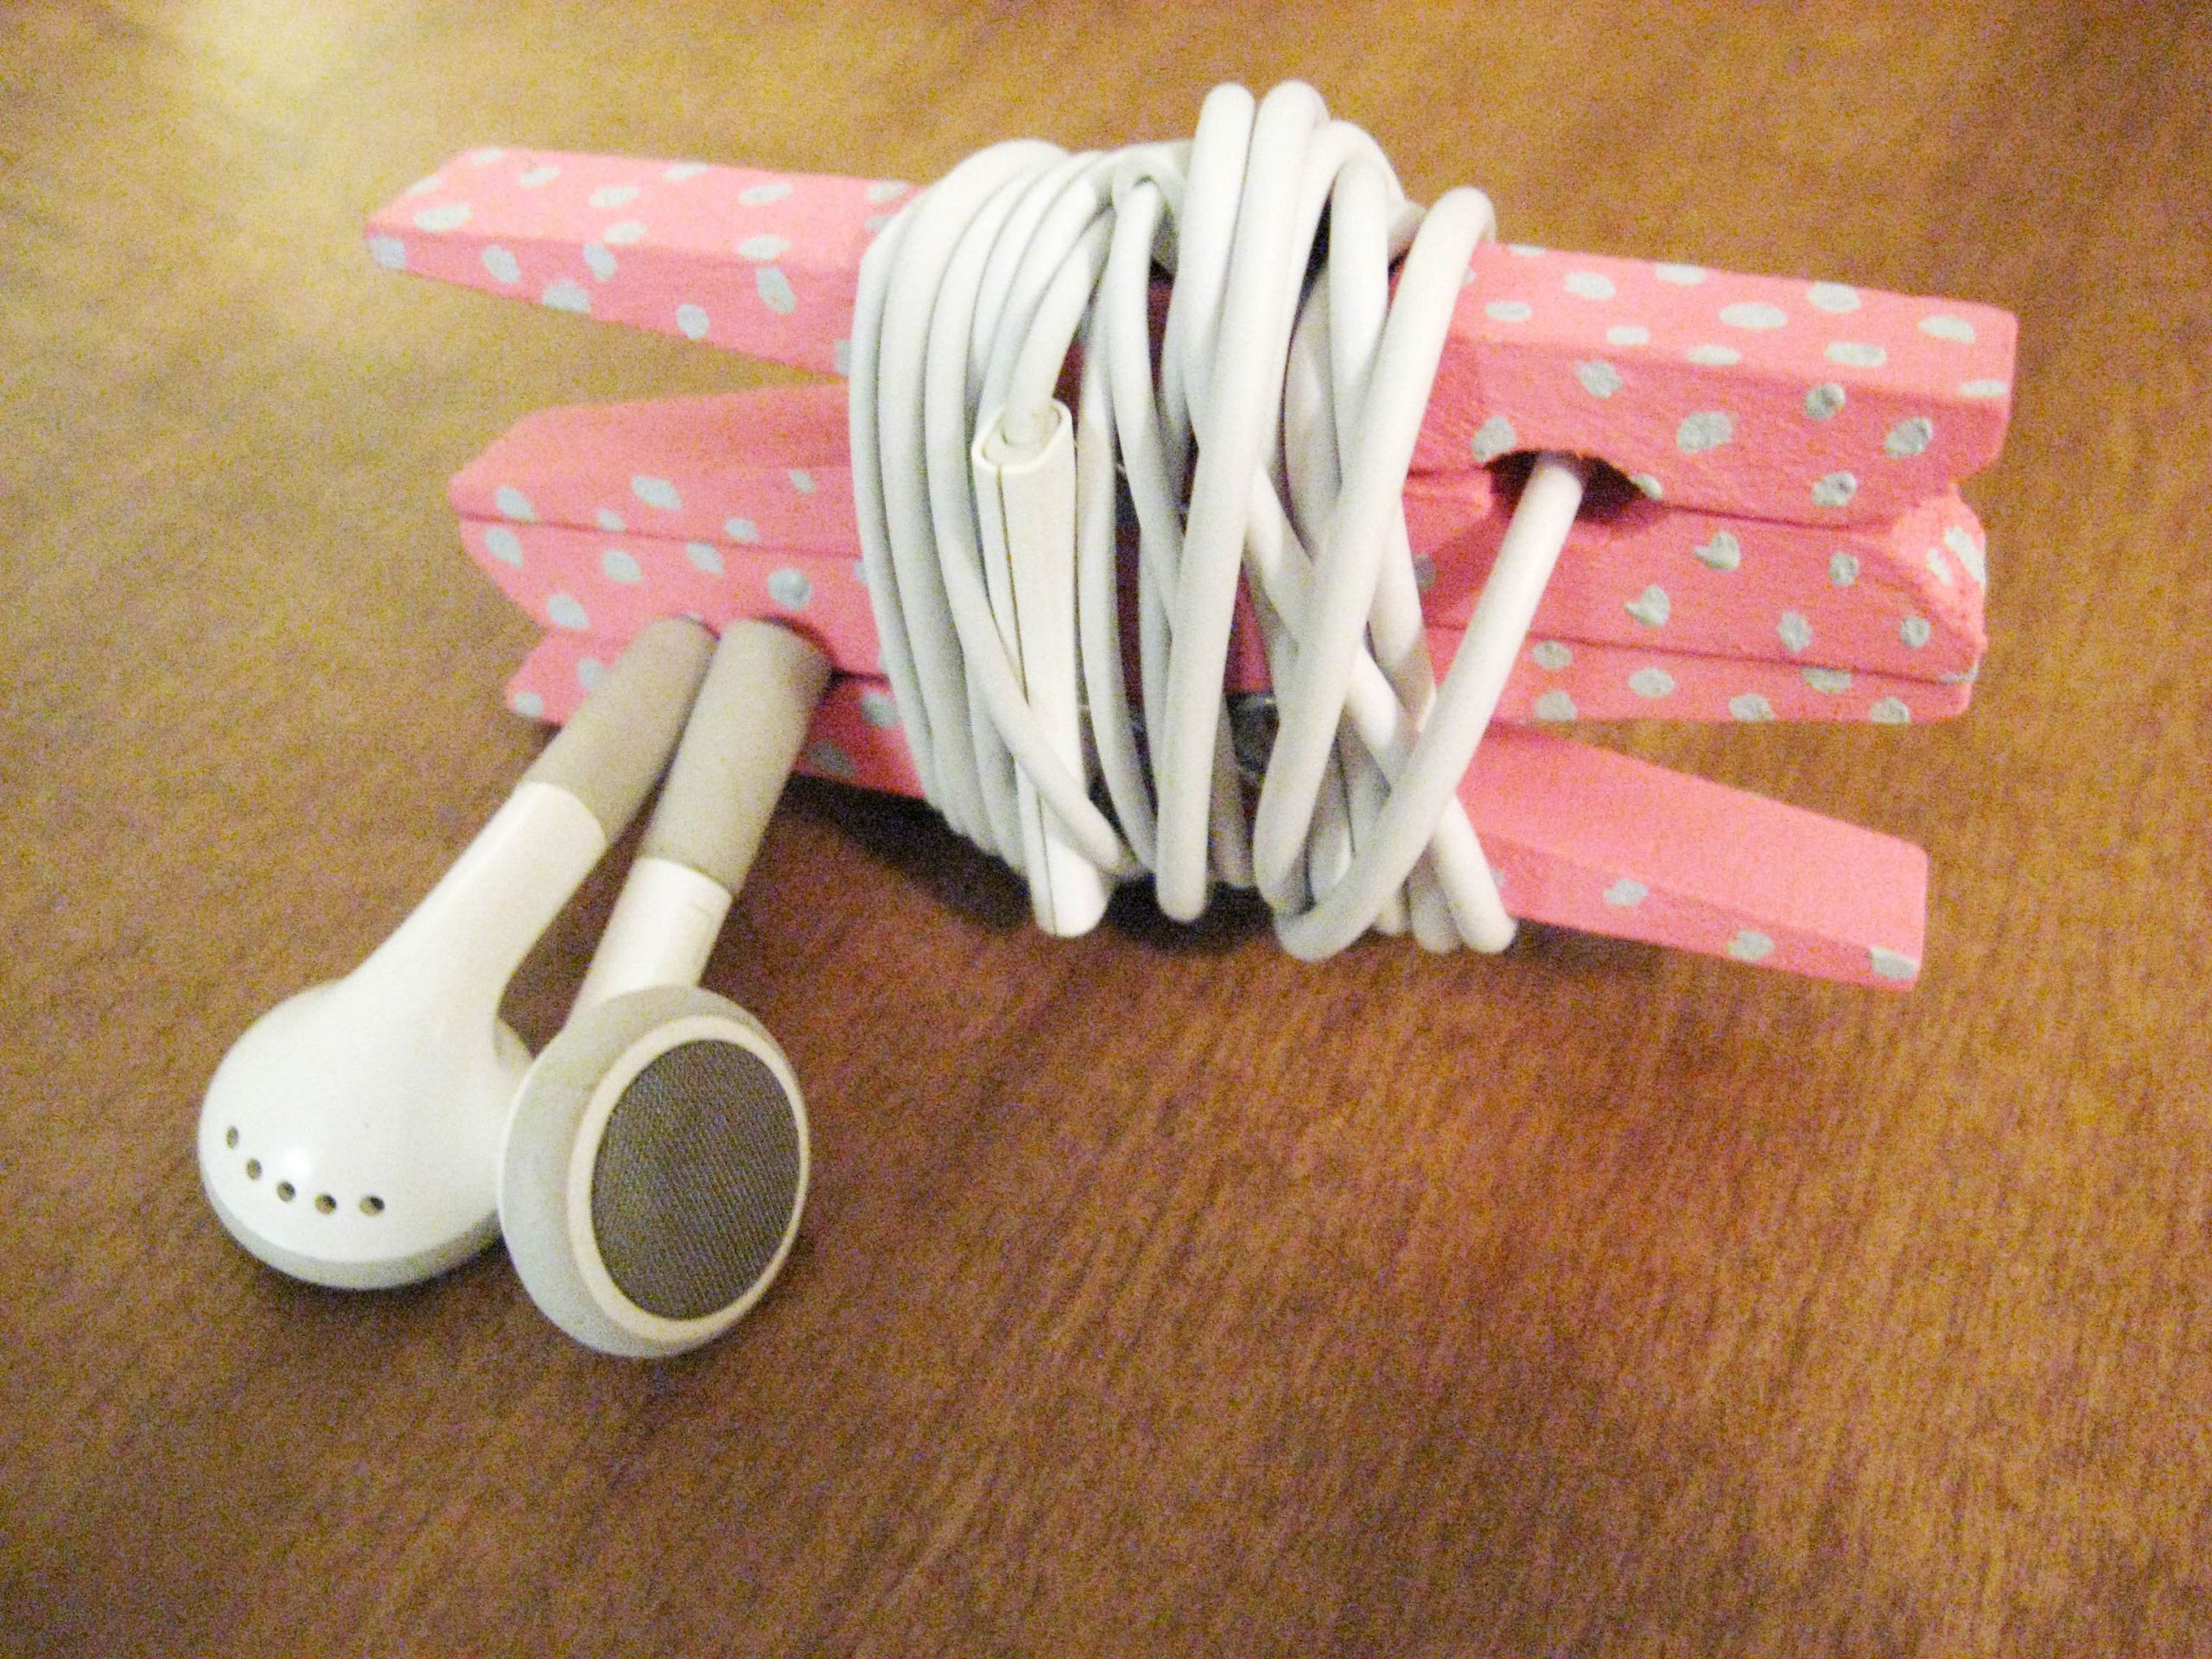 DIY Headphone Organizer
 DIY Headphone Organizer from Clothespins